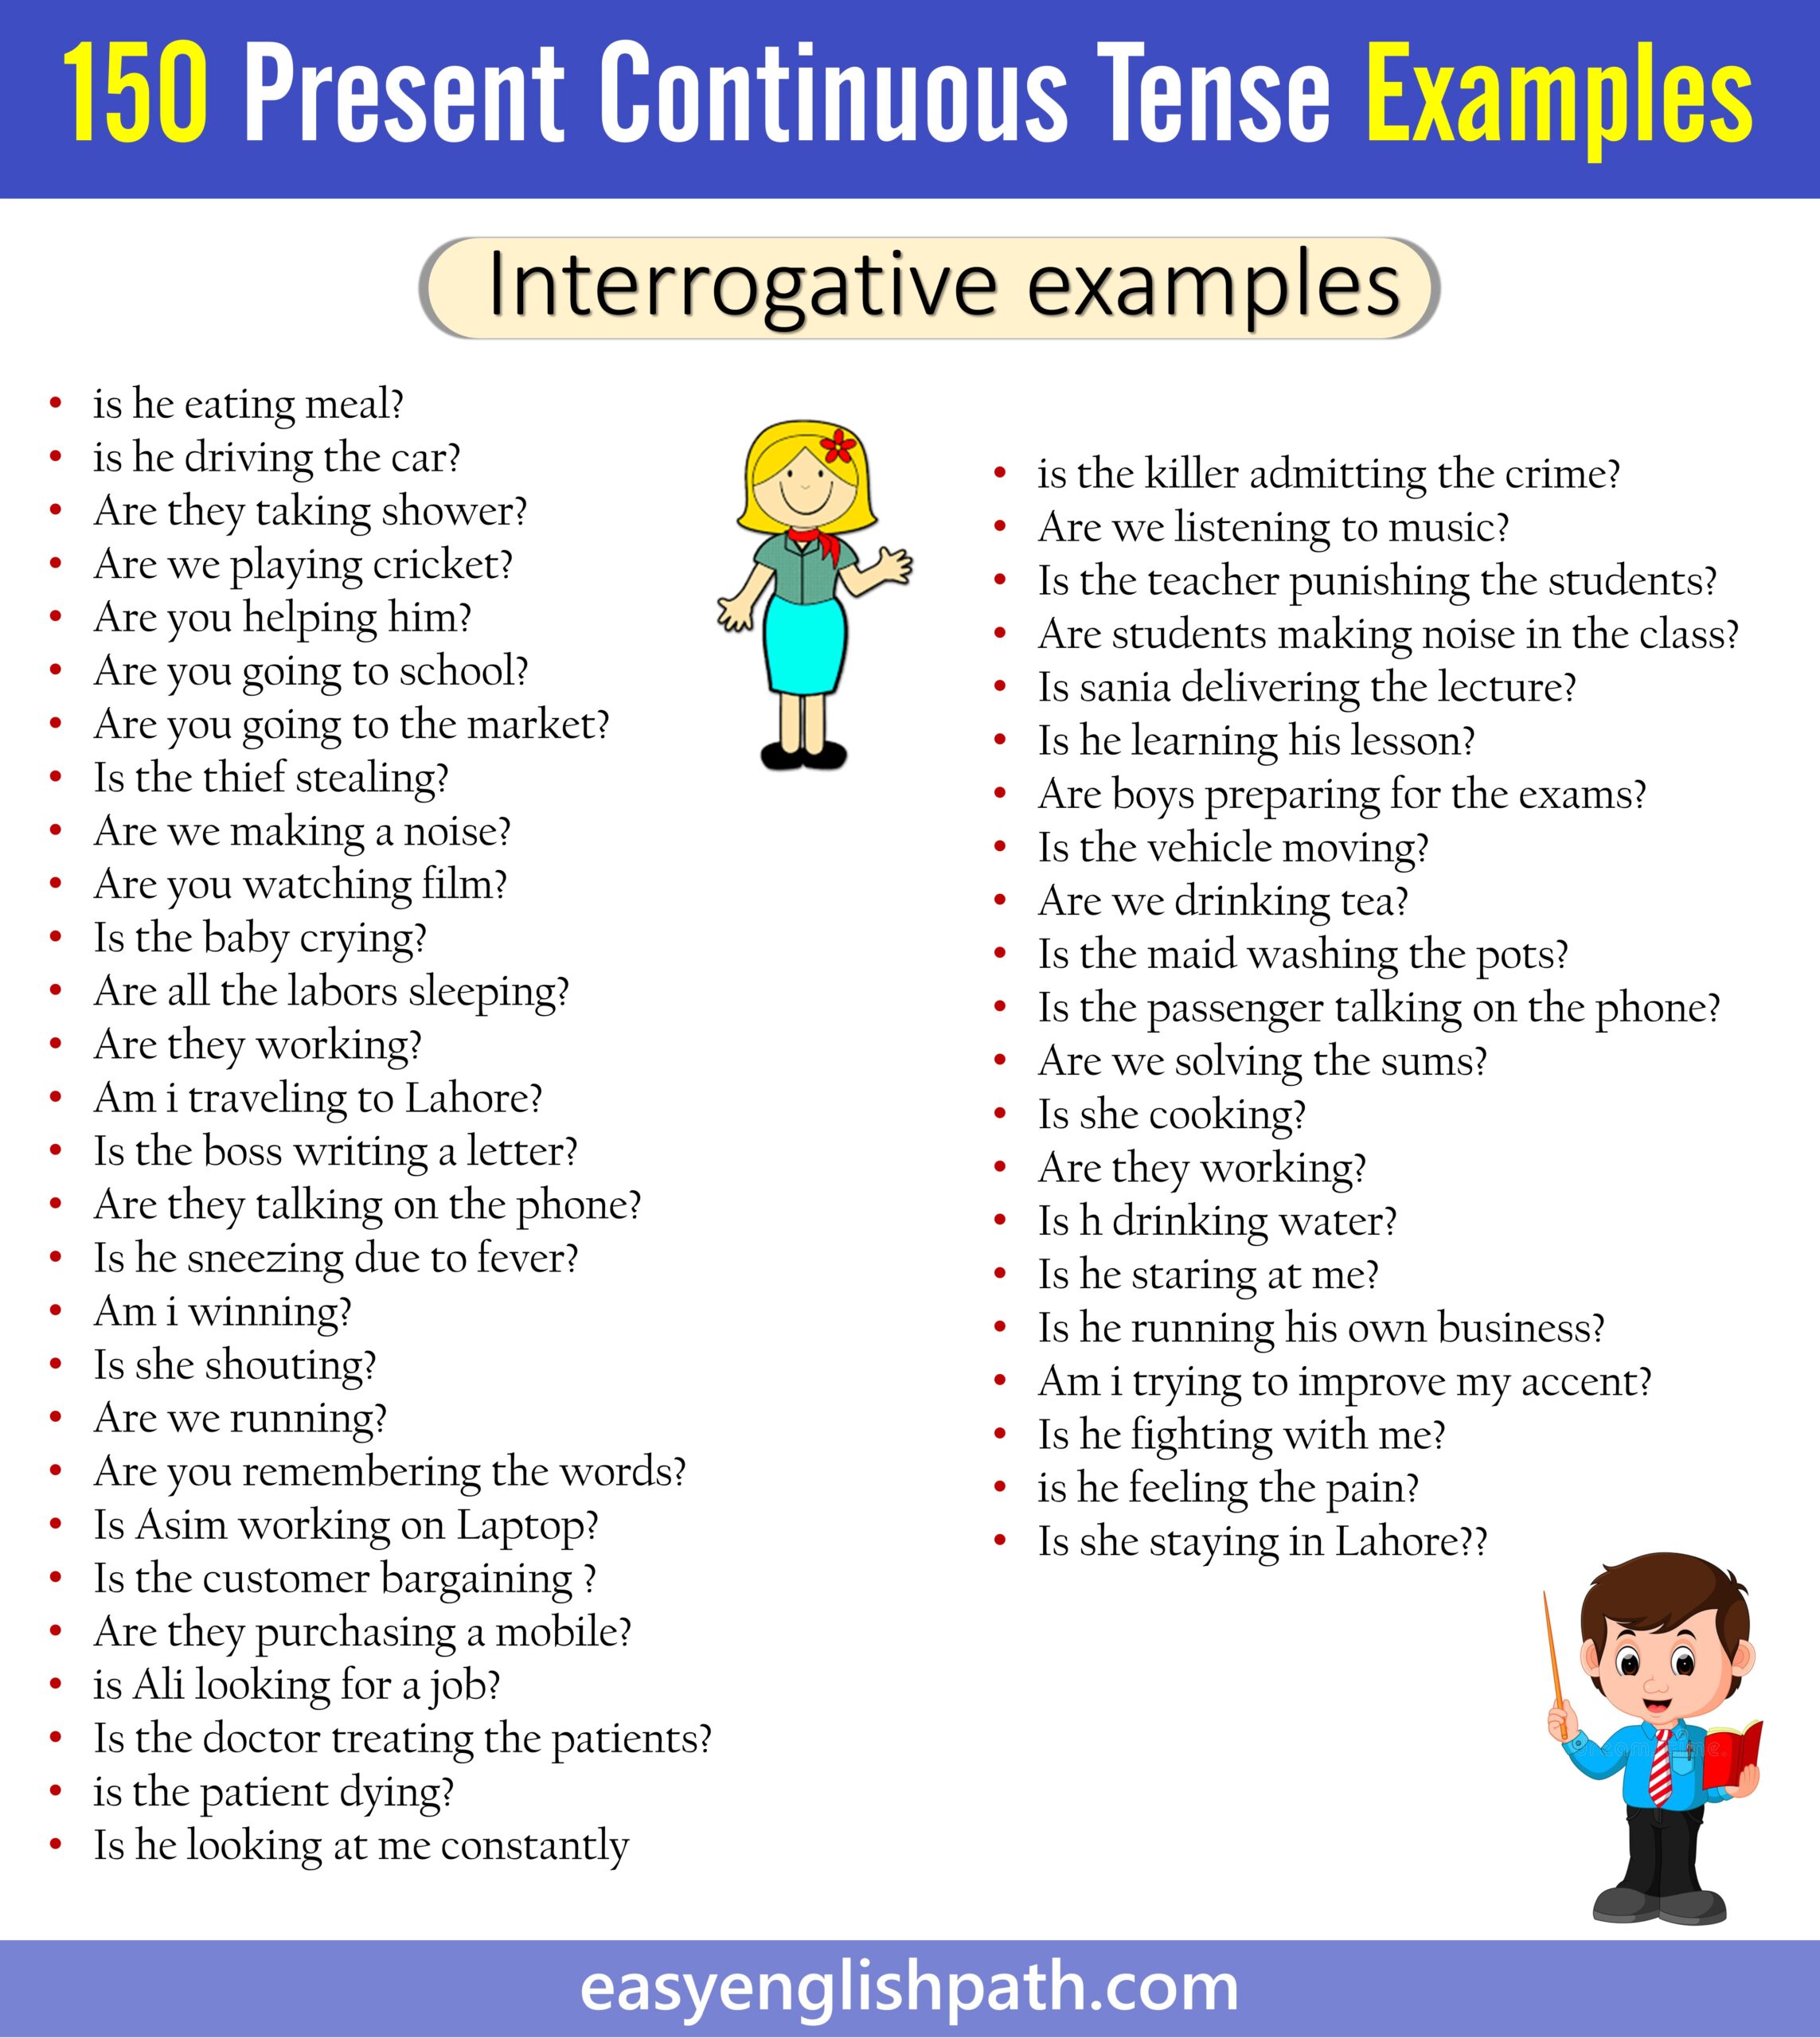 Present Continuous Tense Interrogative Examples in English